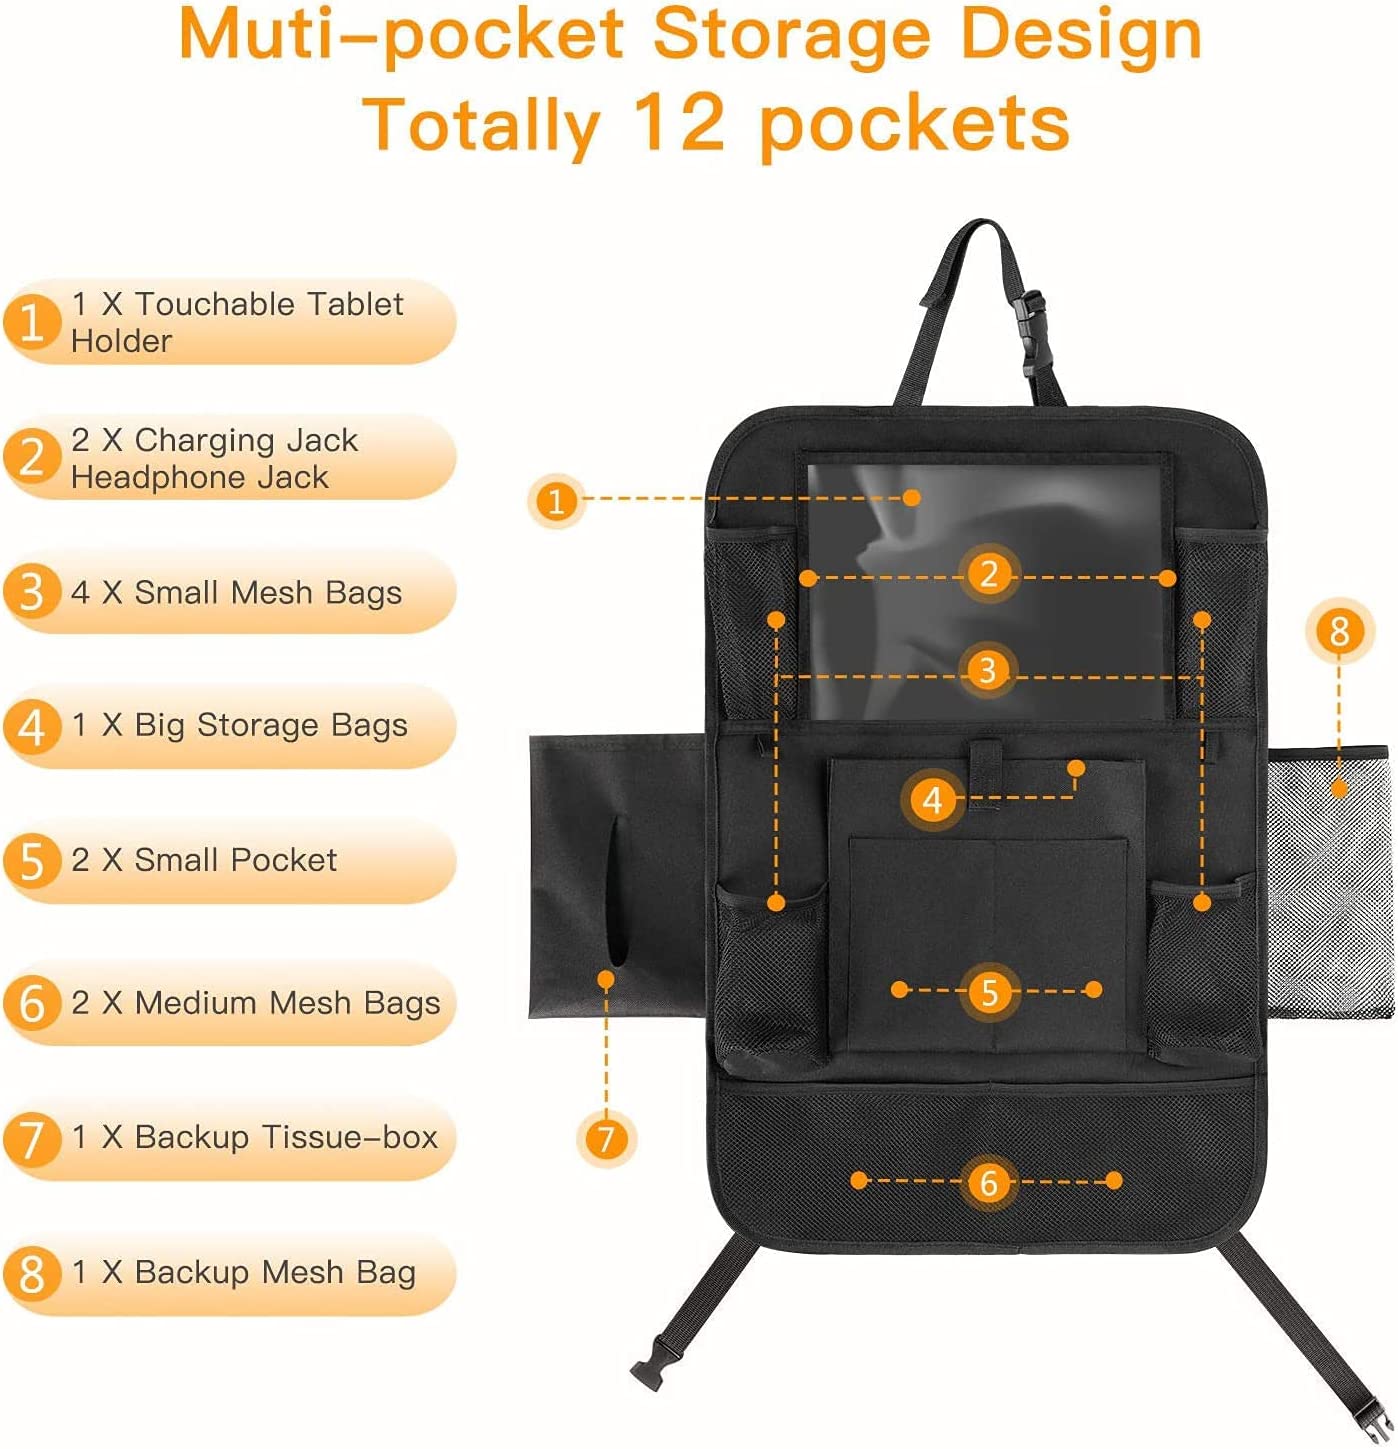 Detailed product information for a backseat car organizer, there is title text which reads, 'Multi-pocket storage design, total 12 pockets.'